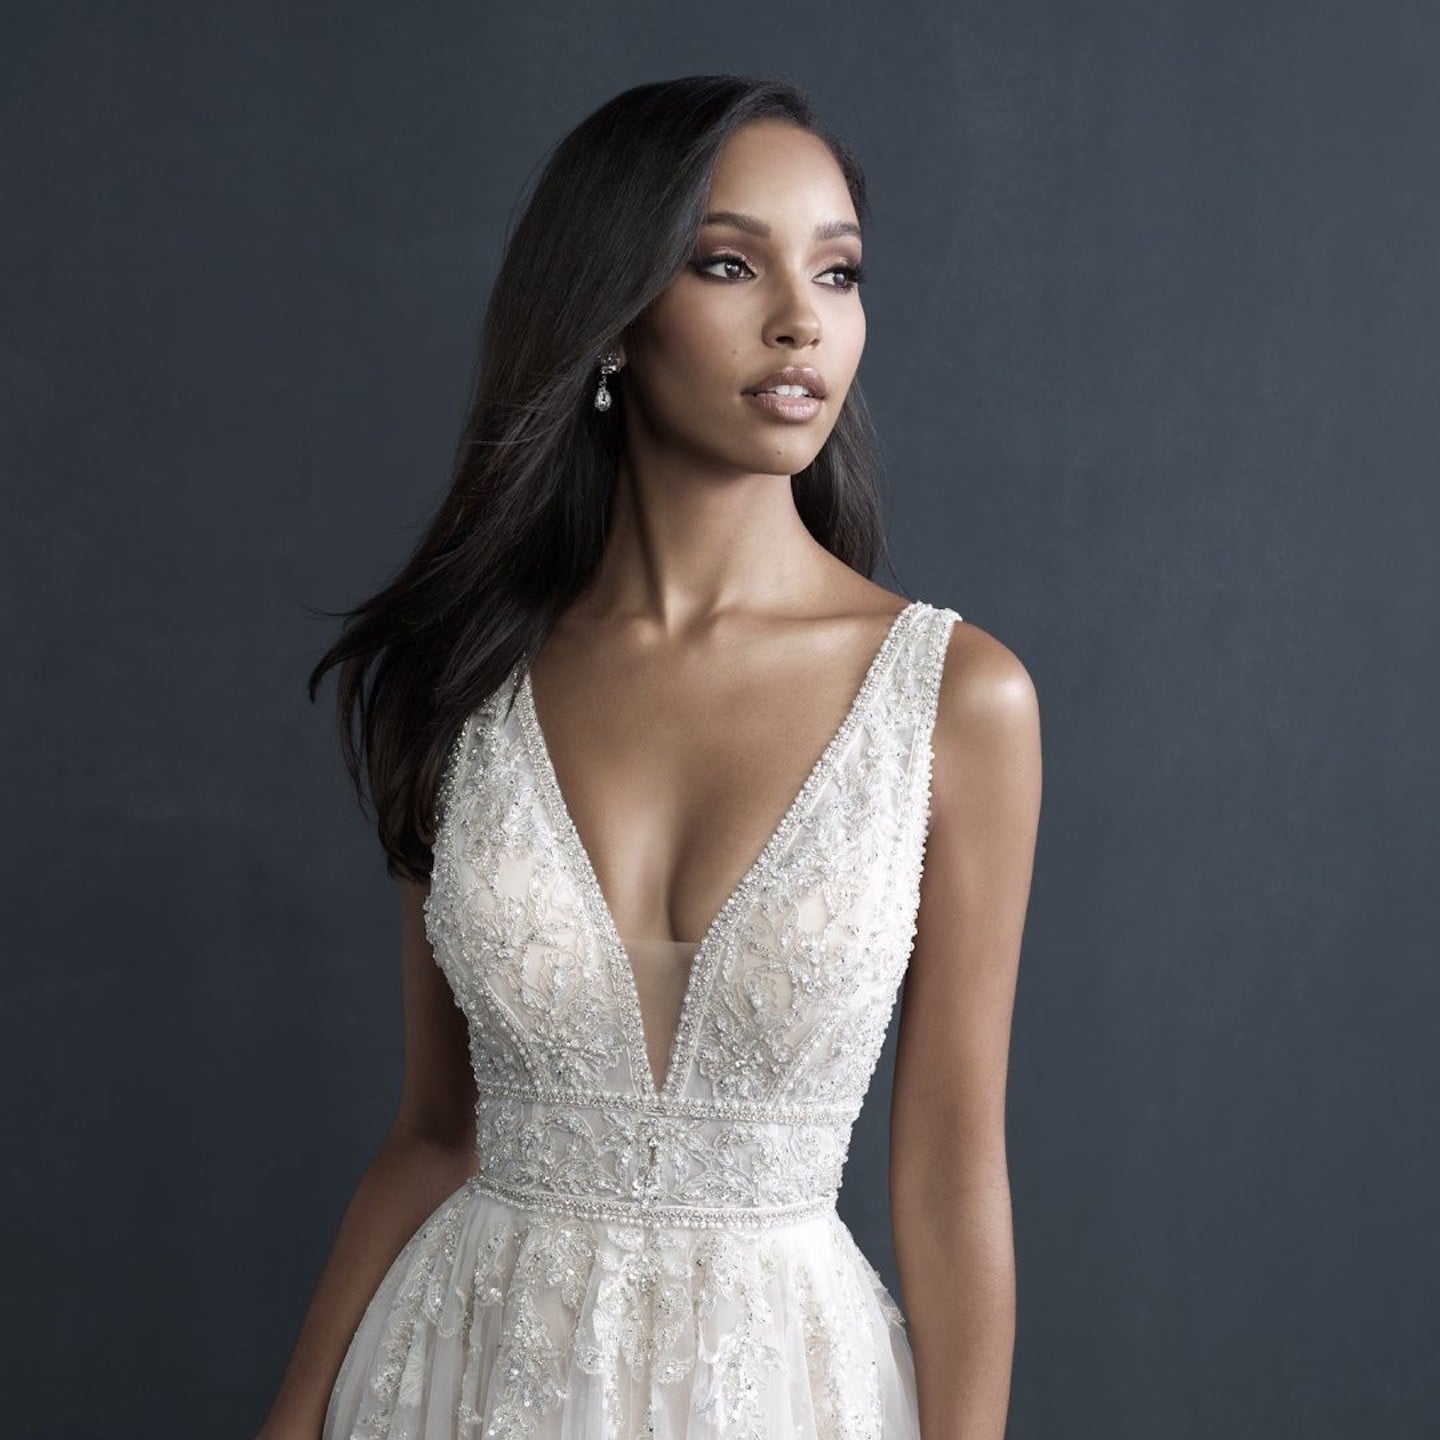 35 Best Places to Buy Wedding Dresses Online - Complete Guide